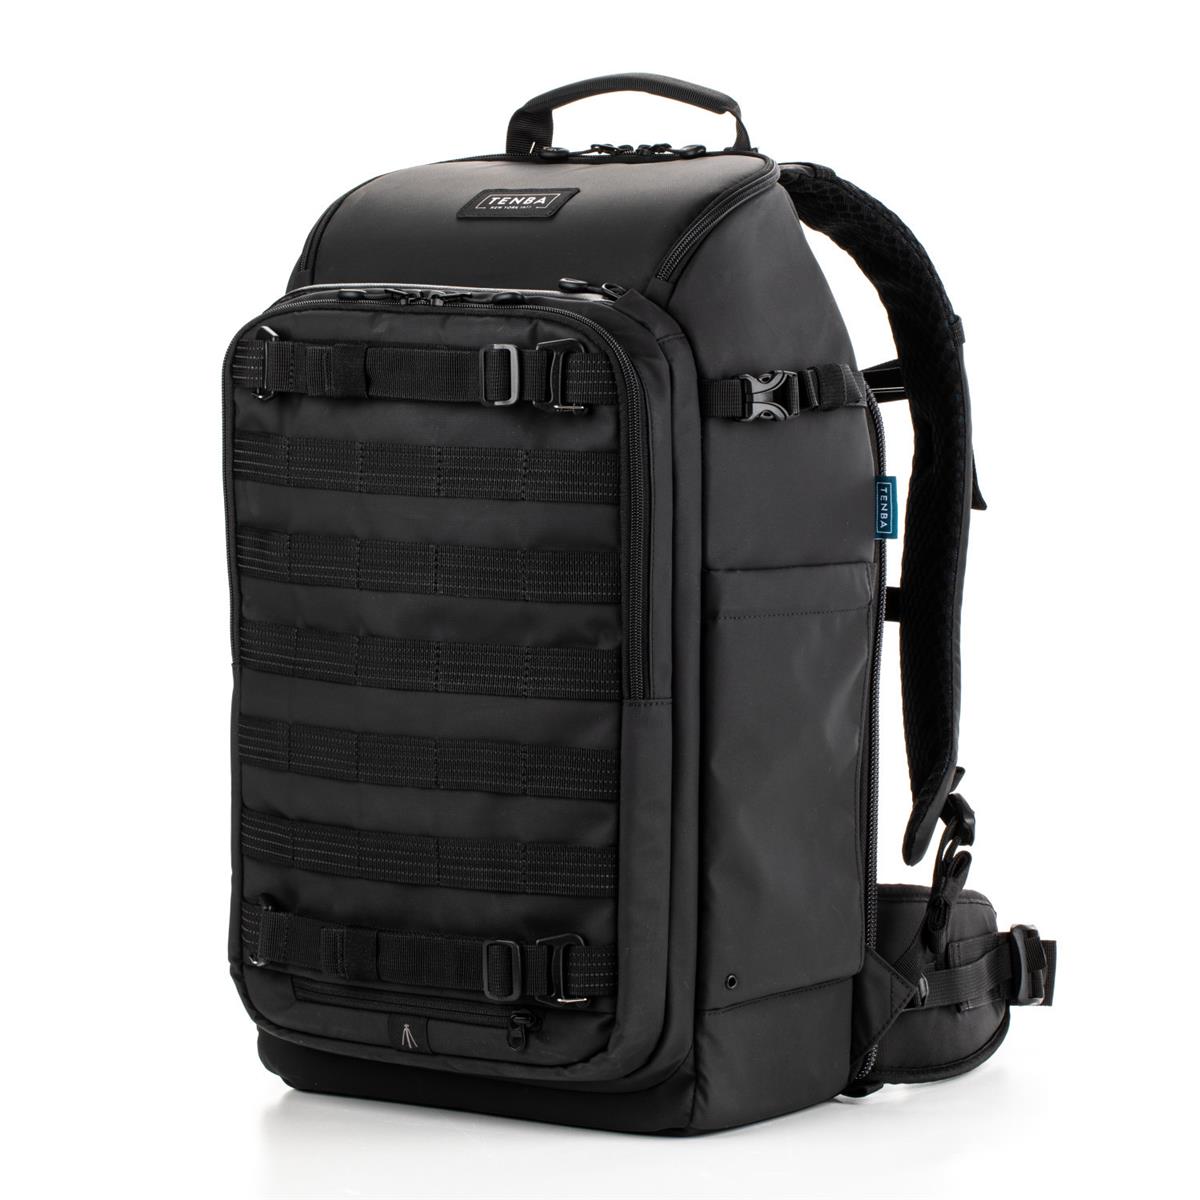 Image of Tenba Axis V2 24L Camera and Laptop Backpack